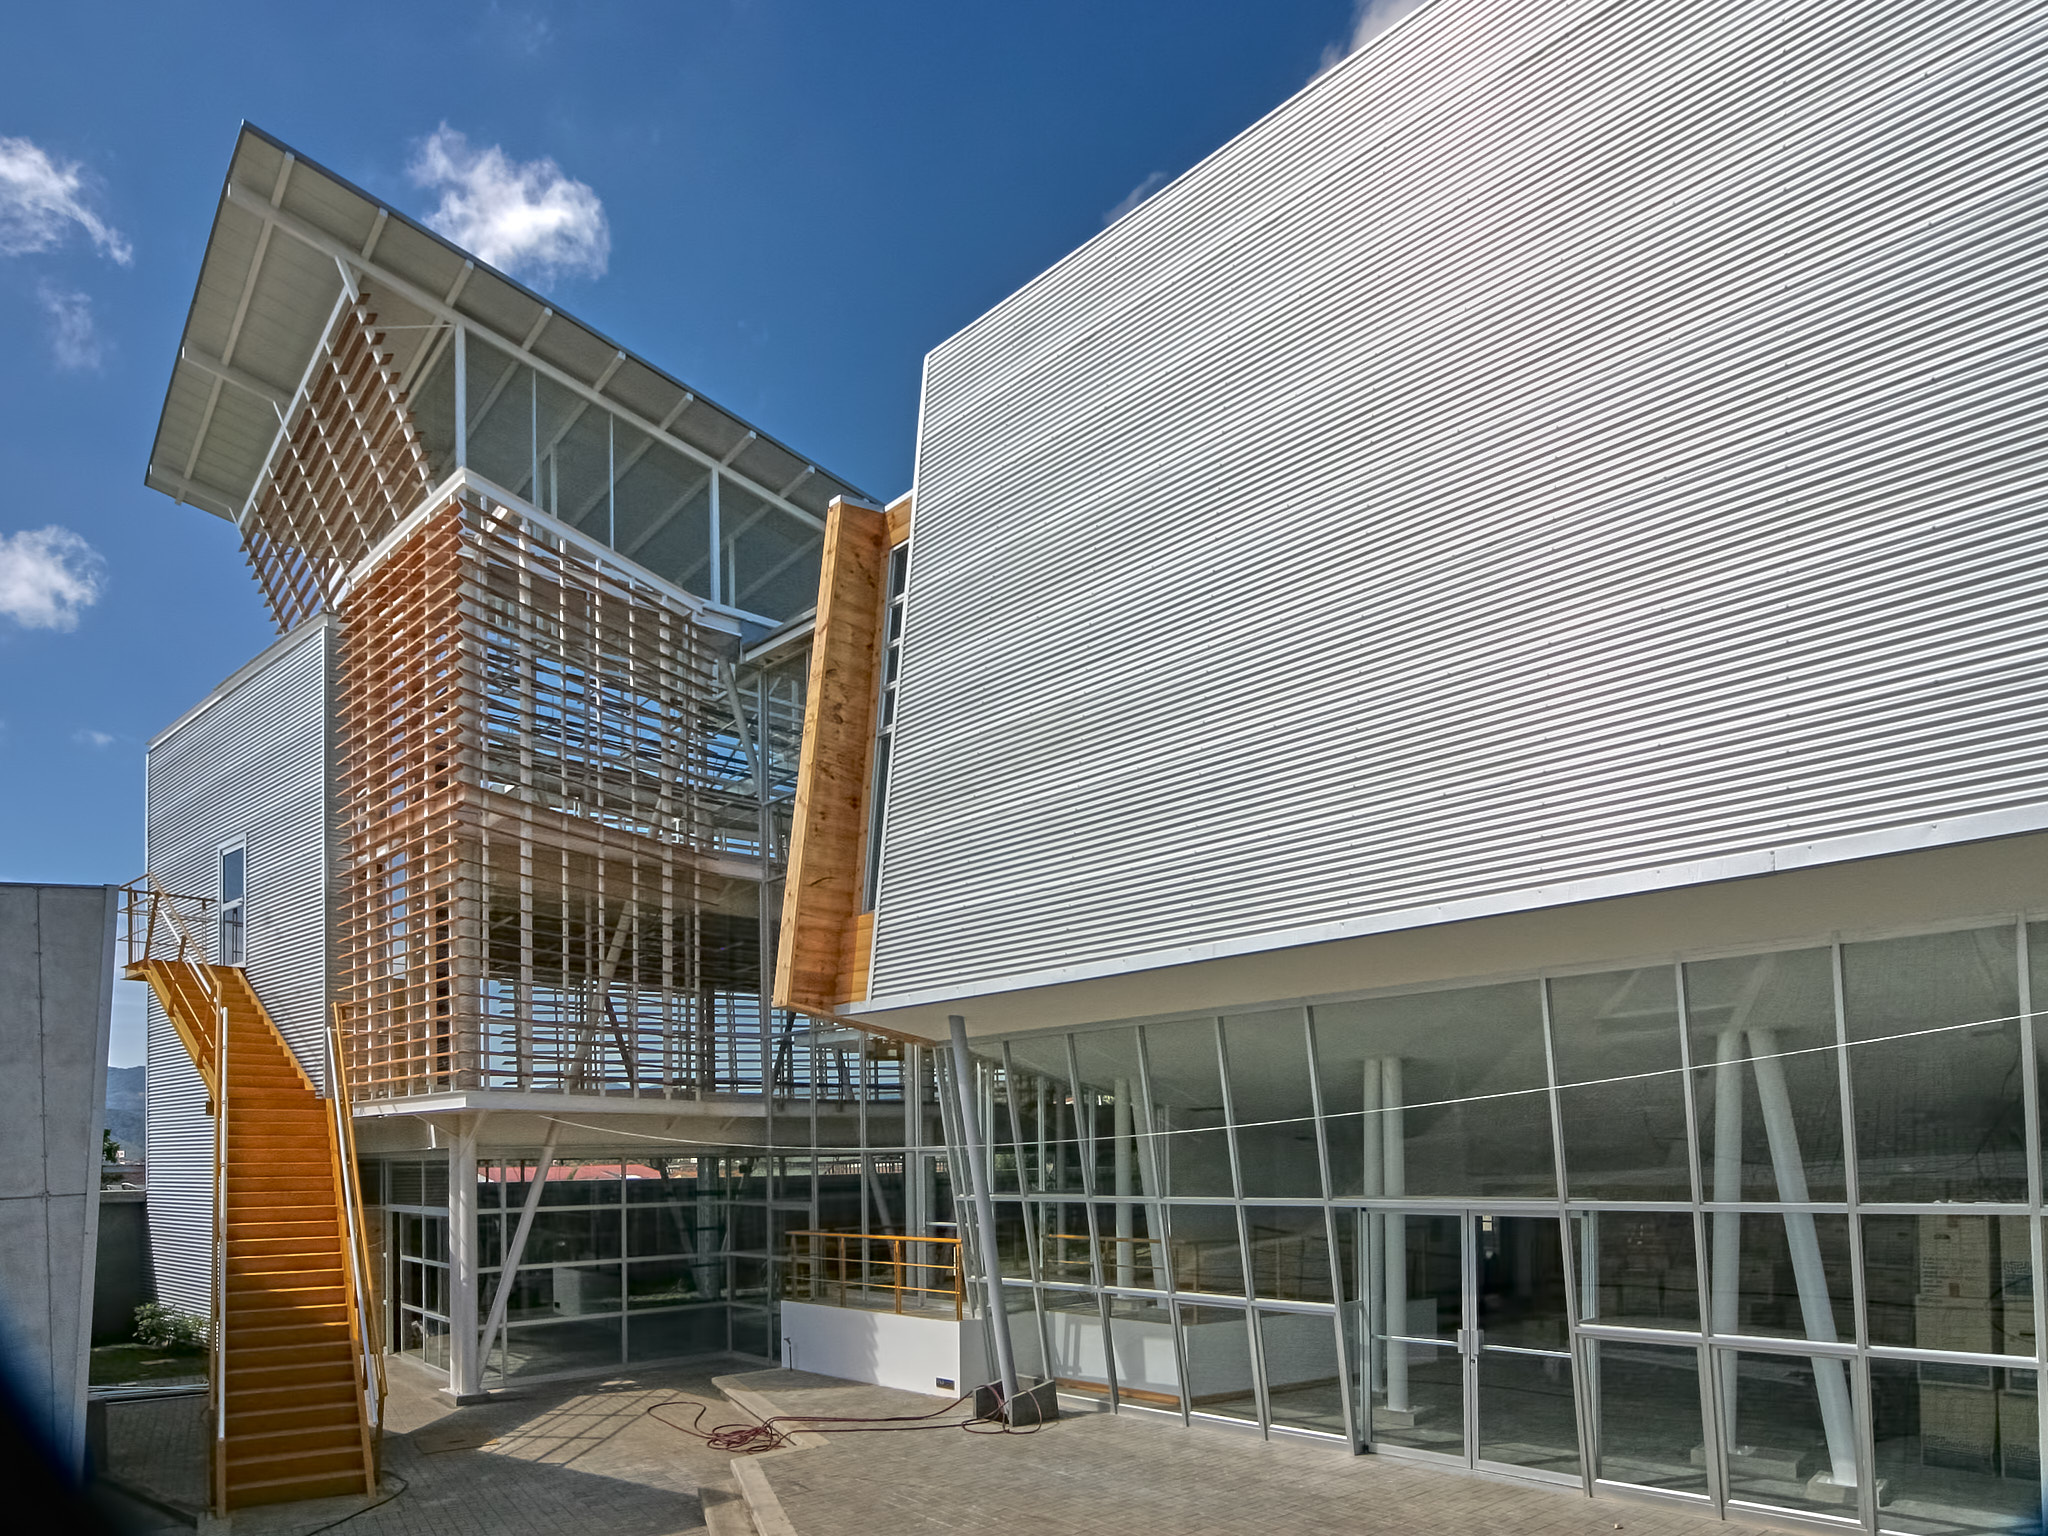 East facade of Veritas University, showing the glass gallery, central glass atrium entrance, and the yellow exterior steel stair of the workshop building